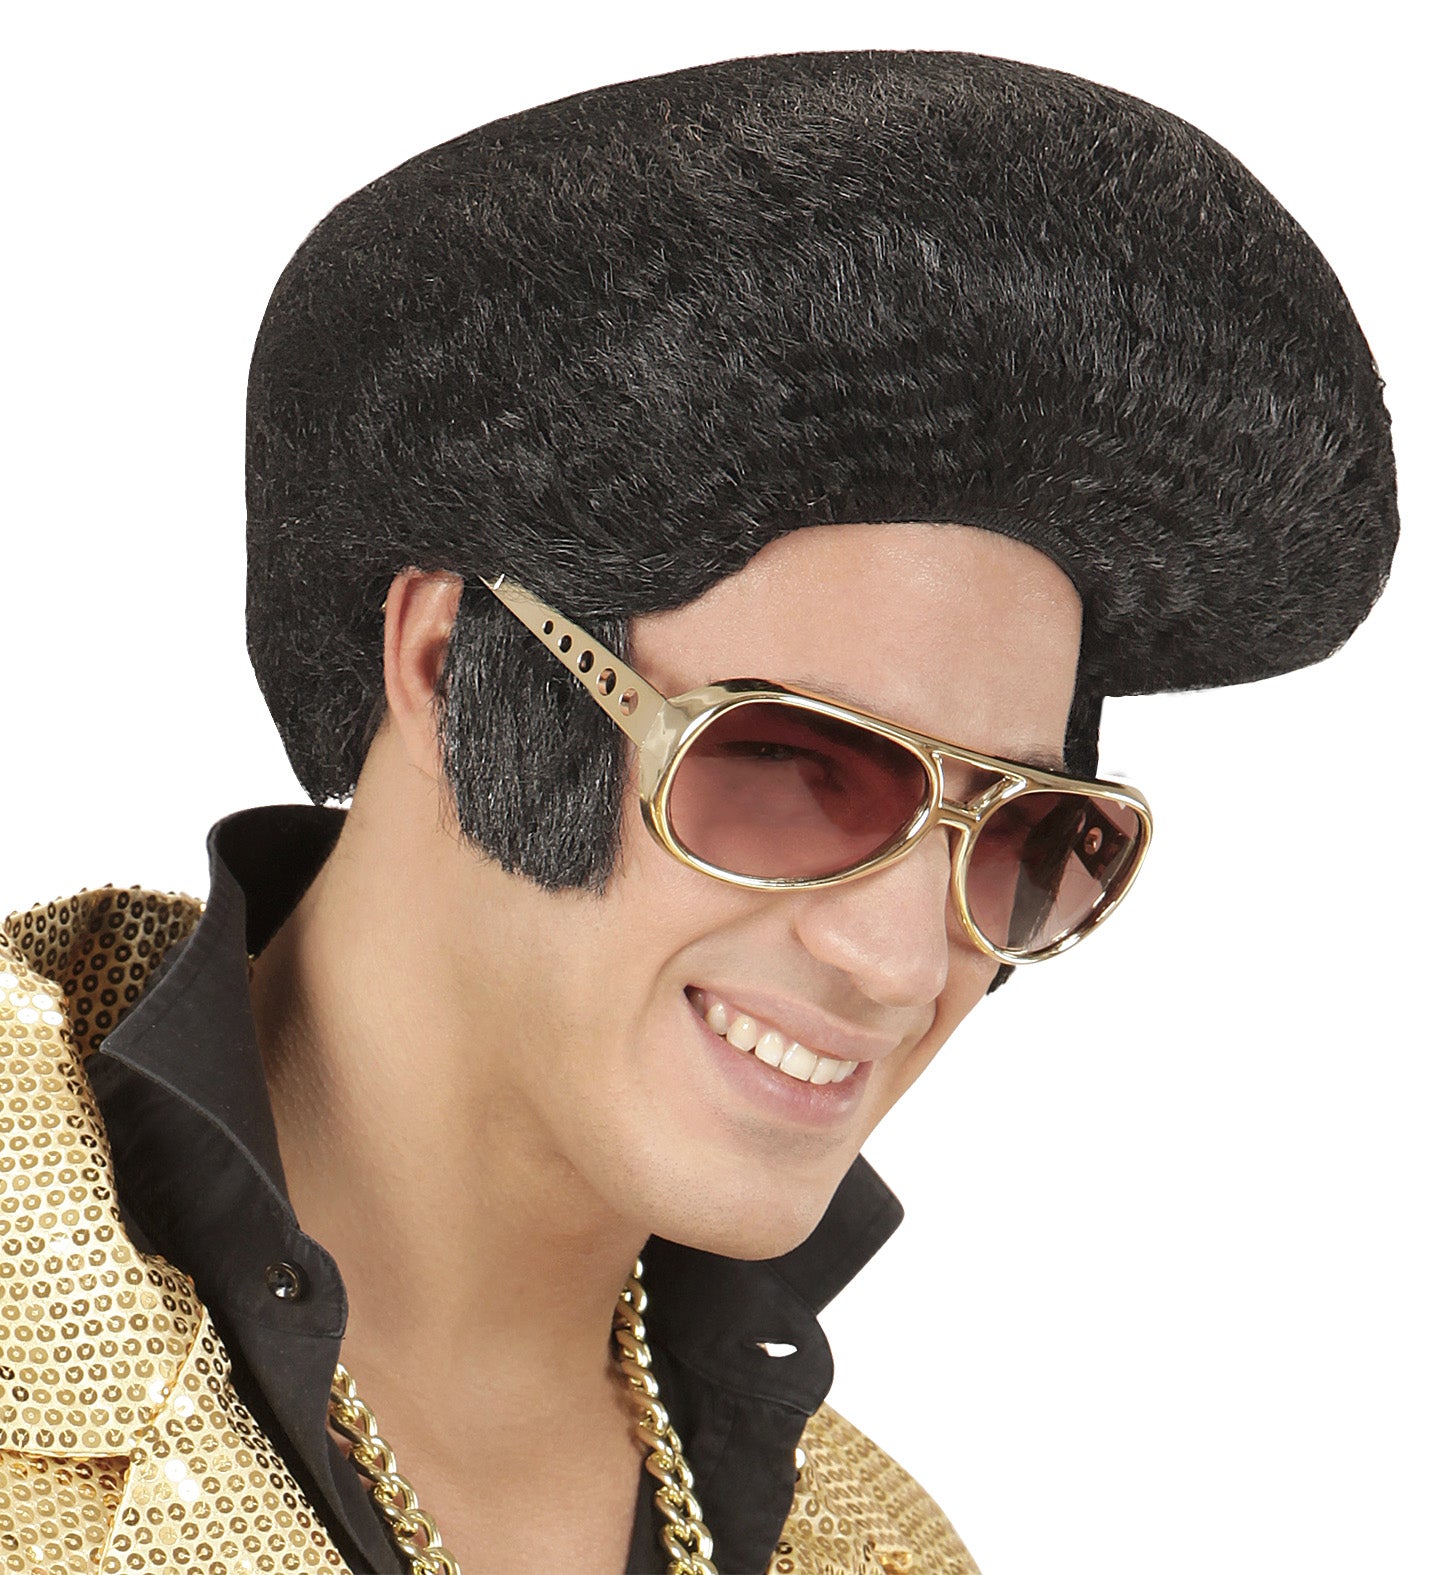 King of Rock and roll Elvis Wig